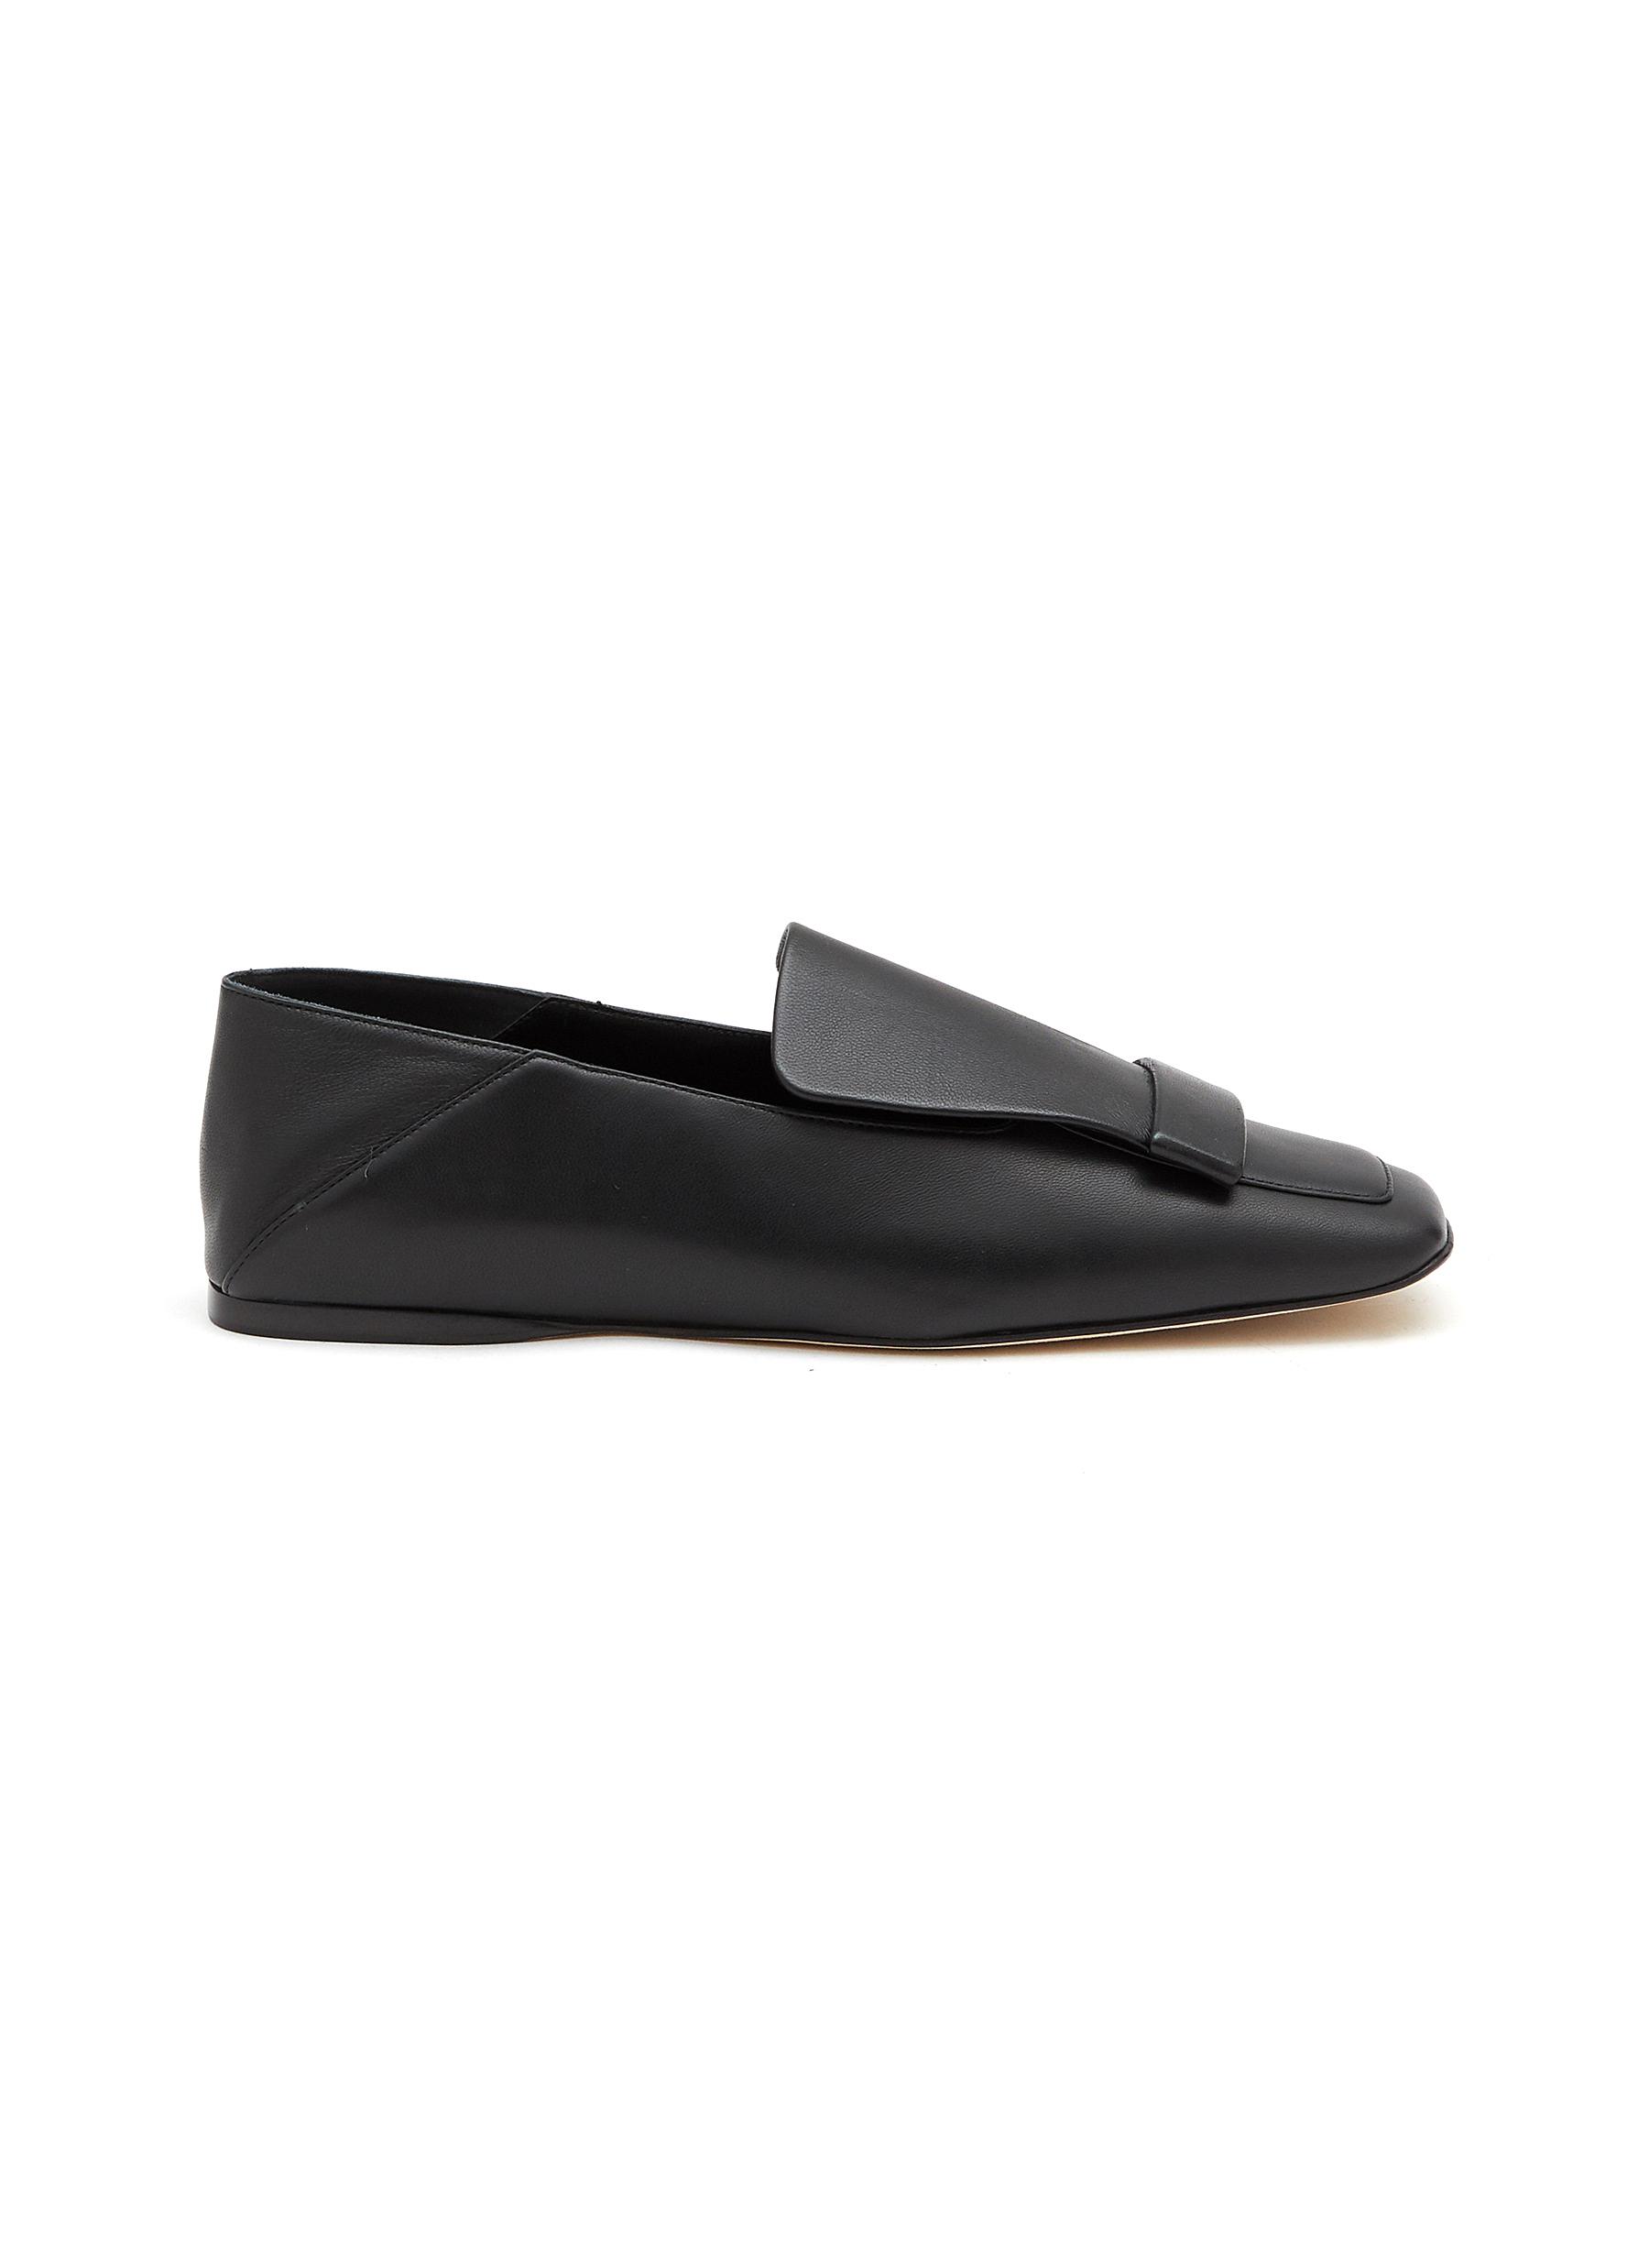 SERGIO ROSSI SR1 LEATHER LOAFERS